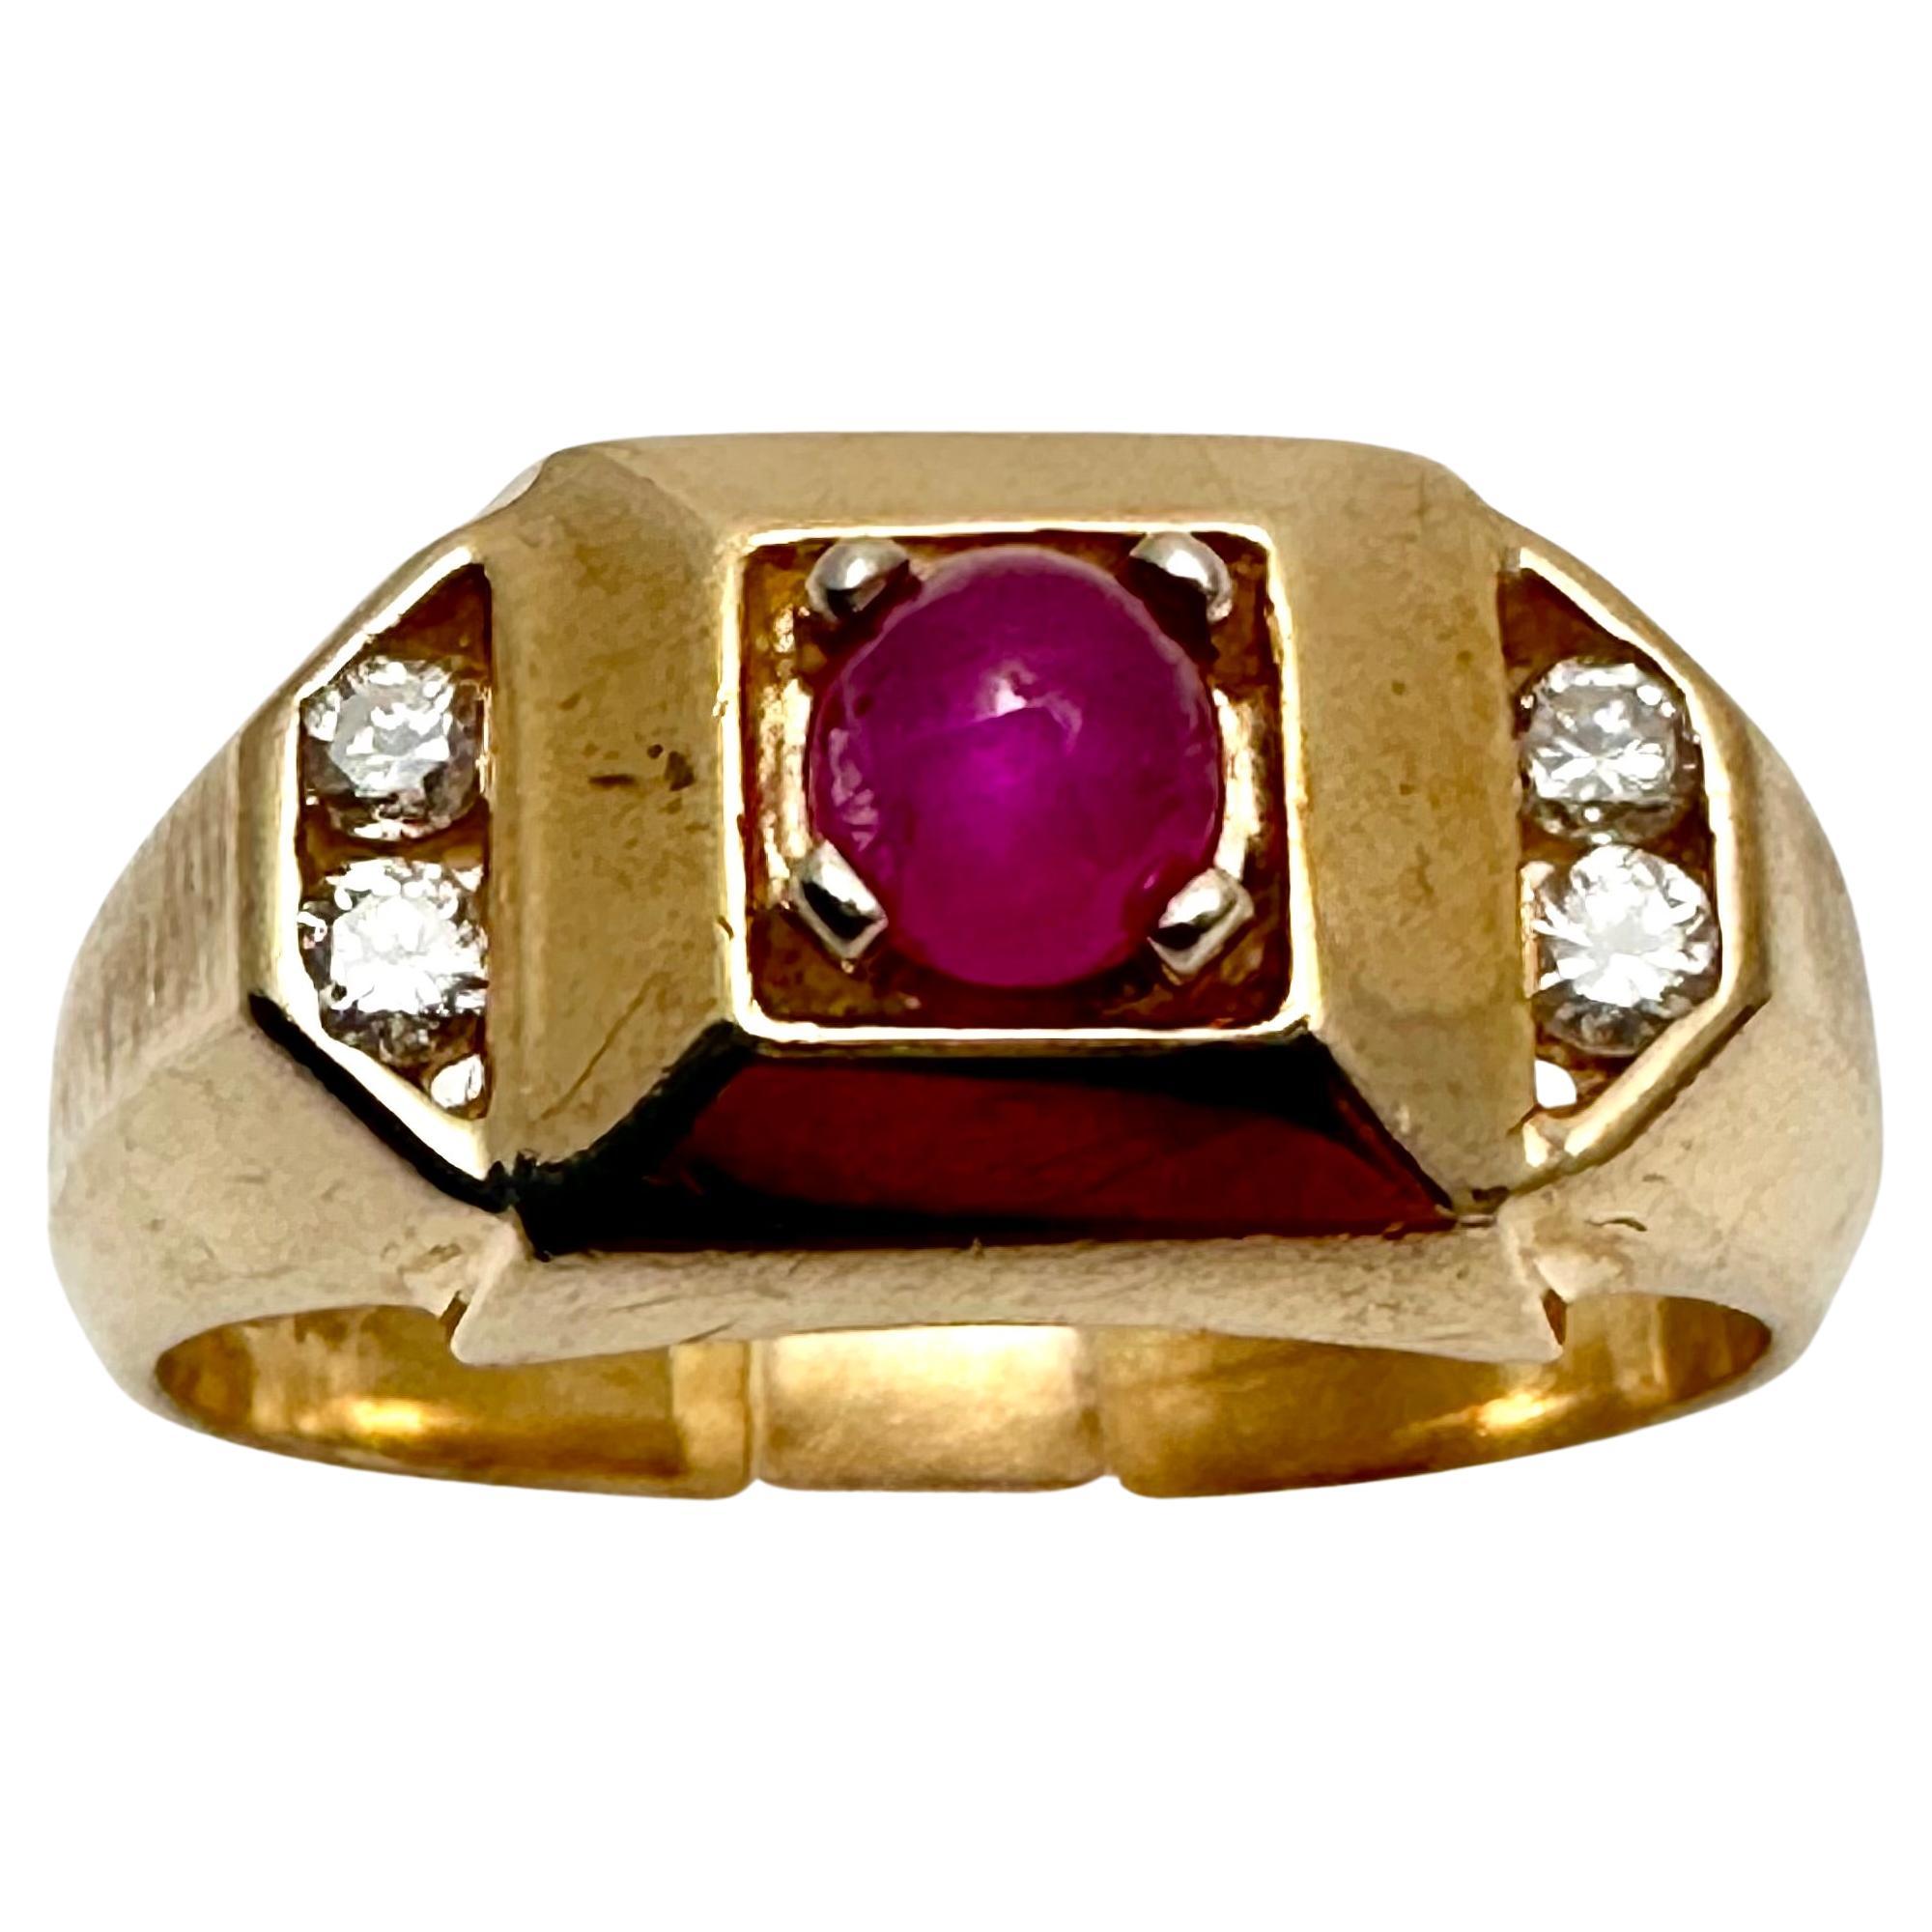 14k Yellow Gold 5mm Cabochon Ruby with 4 Round Diamonds Ring Size 9 1/2 For Sale